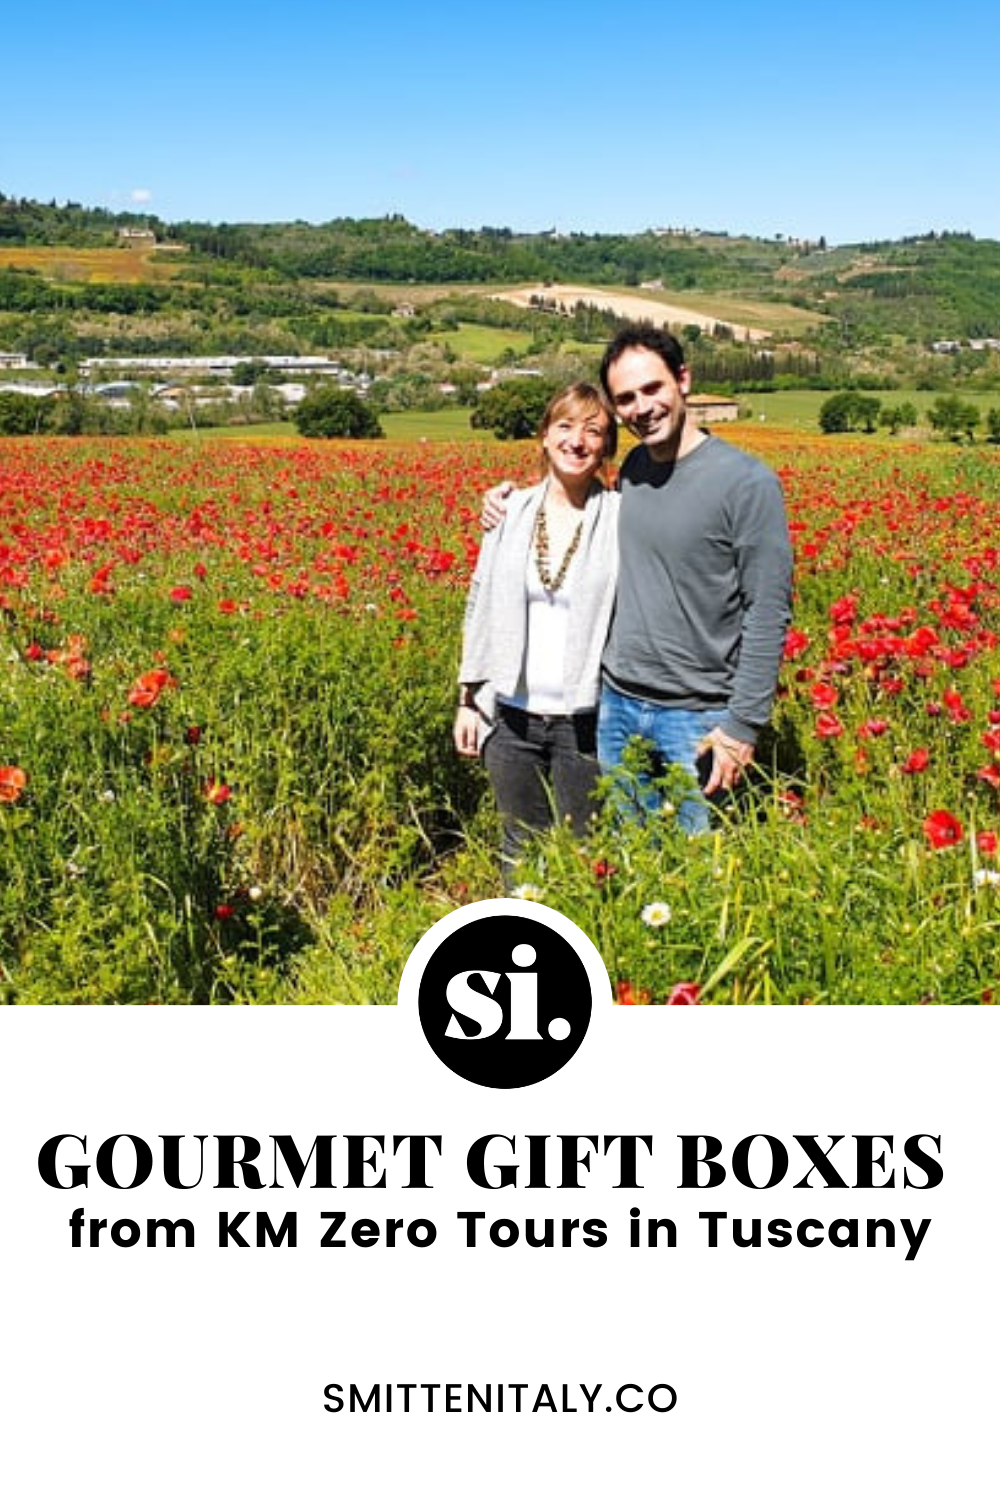 My experience: KM Zero Gourmet Gift Boxes from Tuscany 23